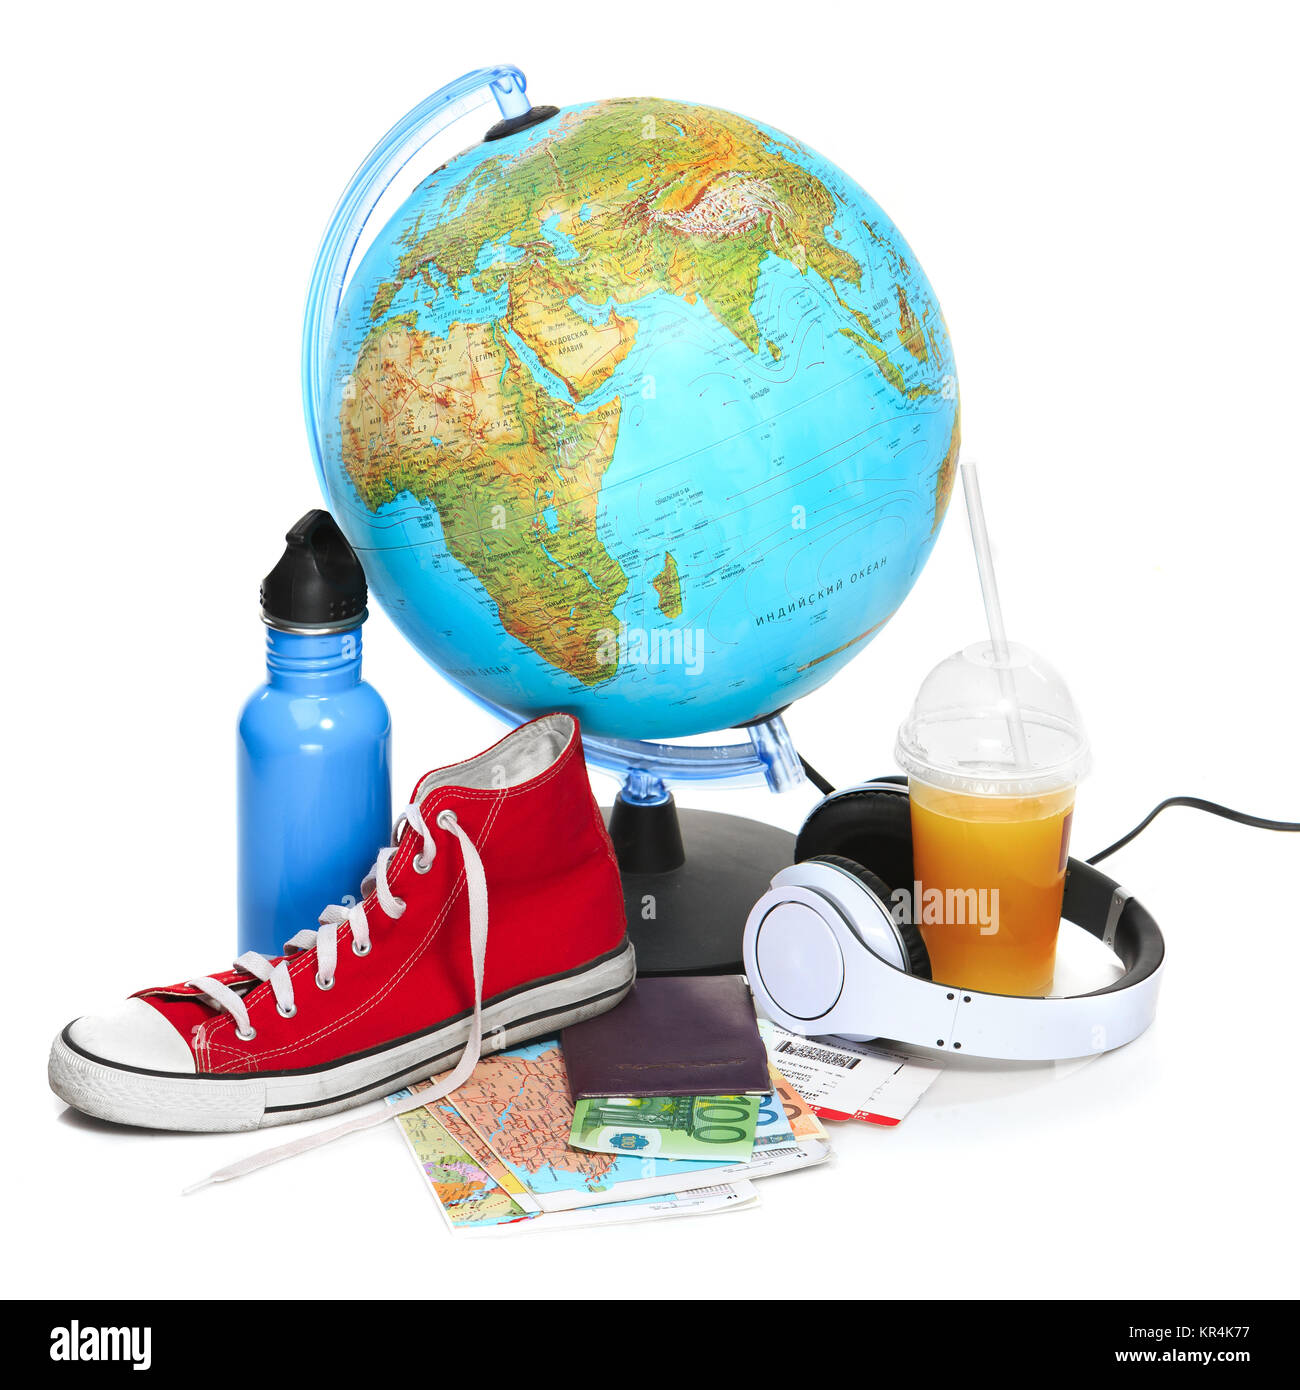 The blue globe, sneakers, thermos and headphones on white background. Stock Photo